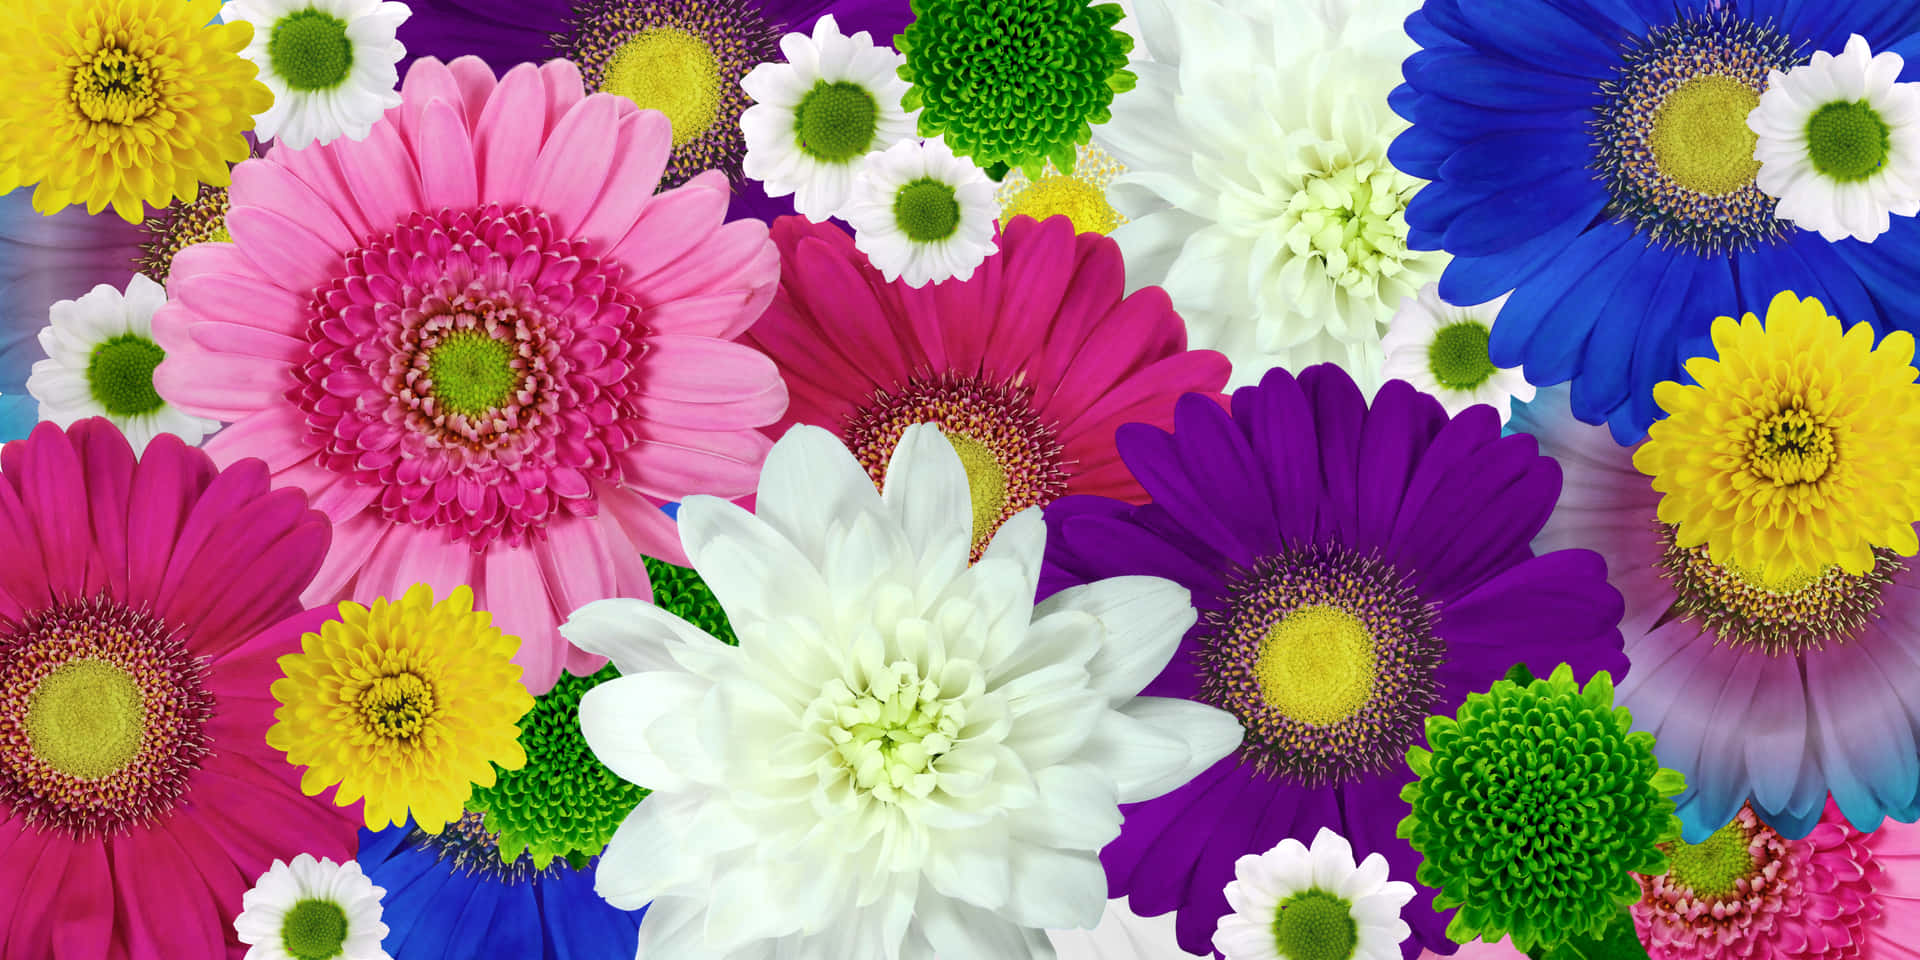 A colorful field of cheerful daisies! Wallpaper